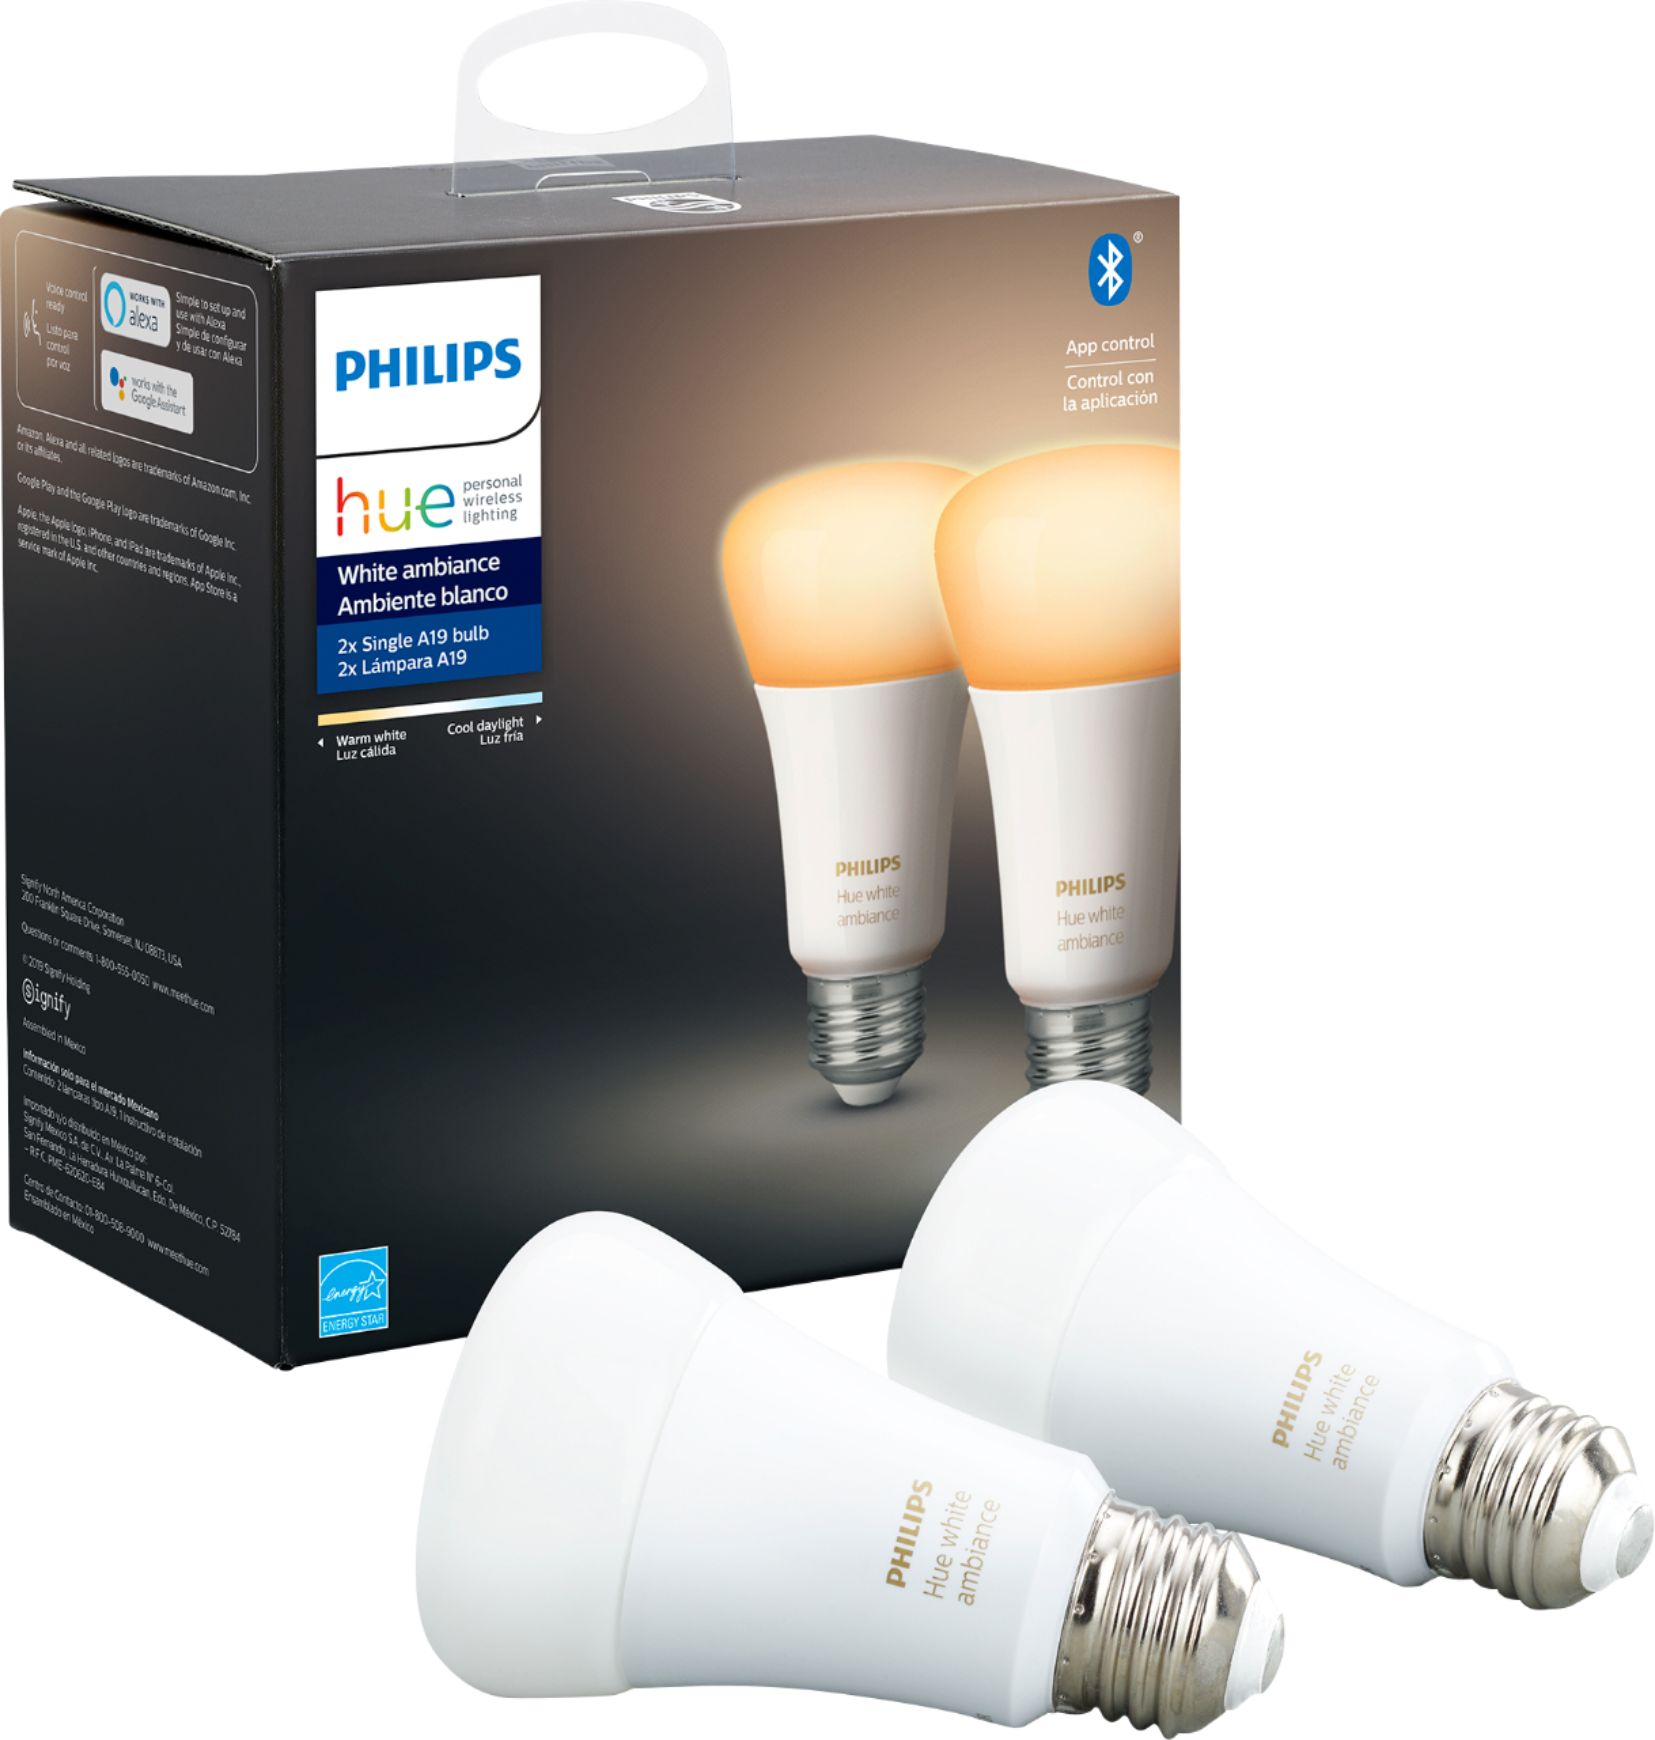 Philips Hue A19 Bluetooth 60W Smart LED Starter Kit White and Color  Ambiance 562918 - Best Buy